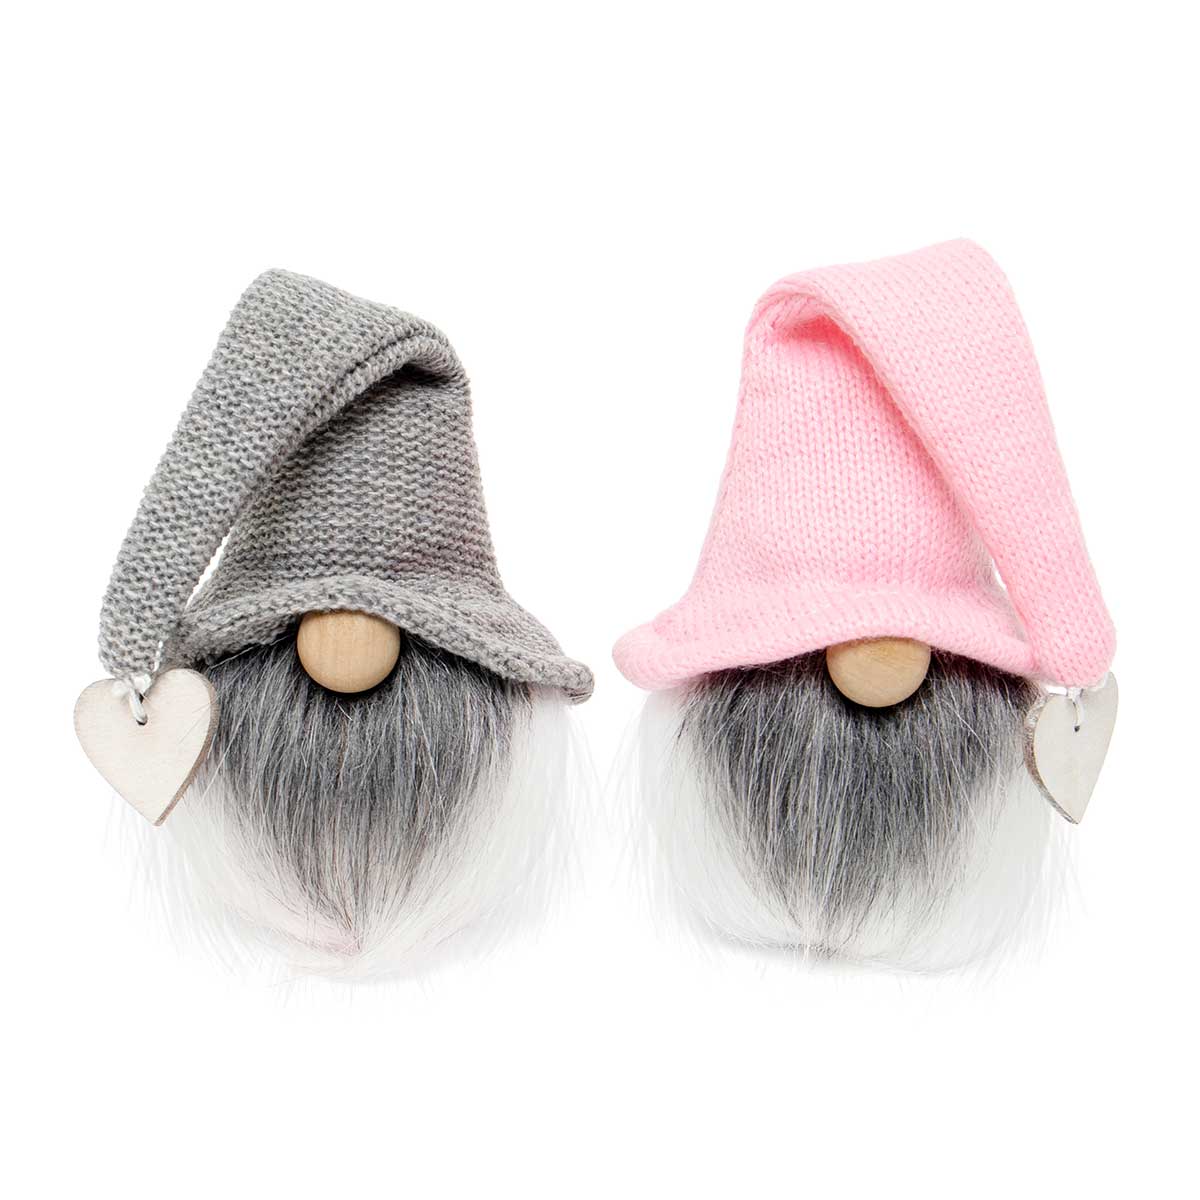 !Flop Top Gnome with Heart and White/Grey Beard 2 Assorted